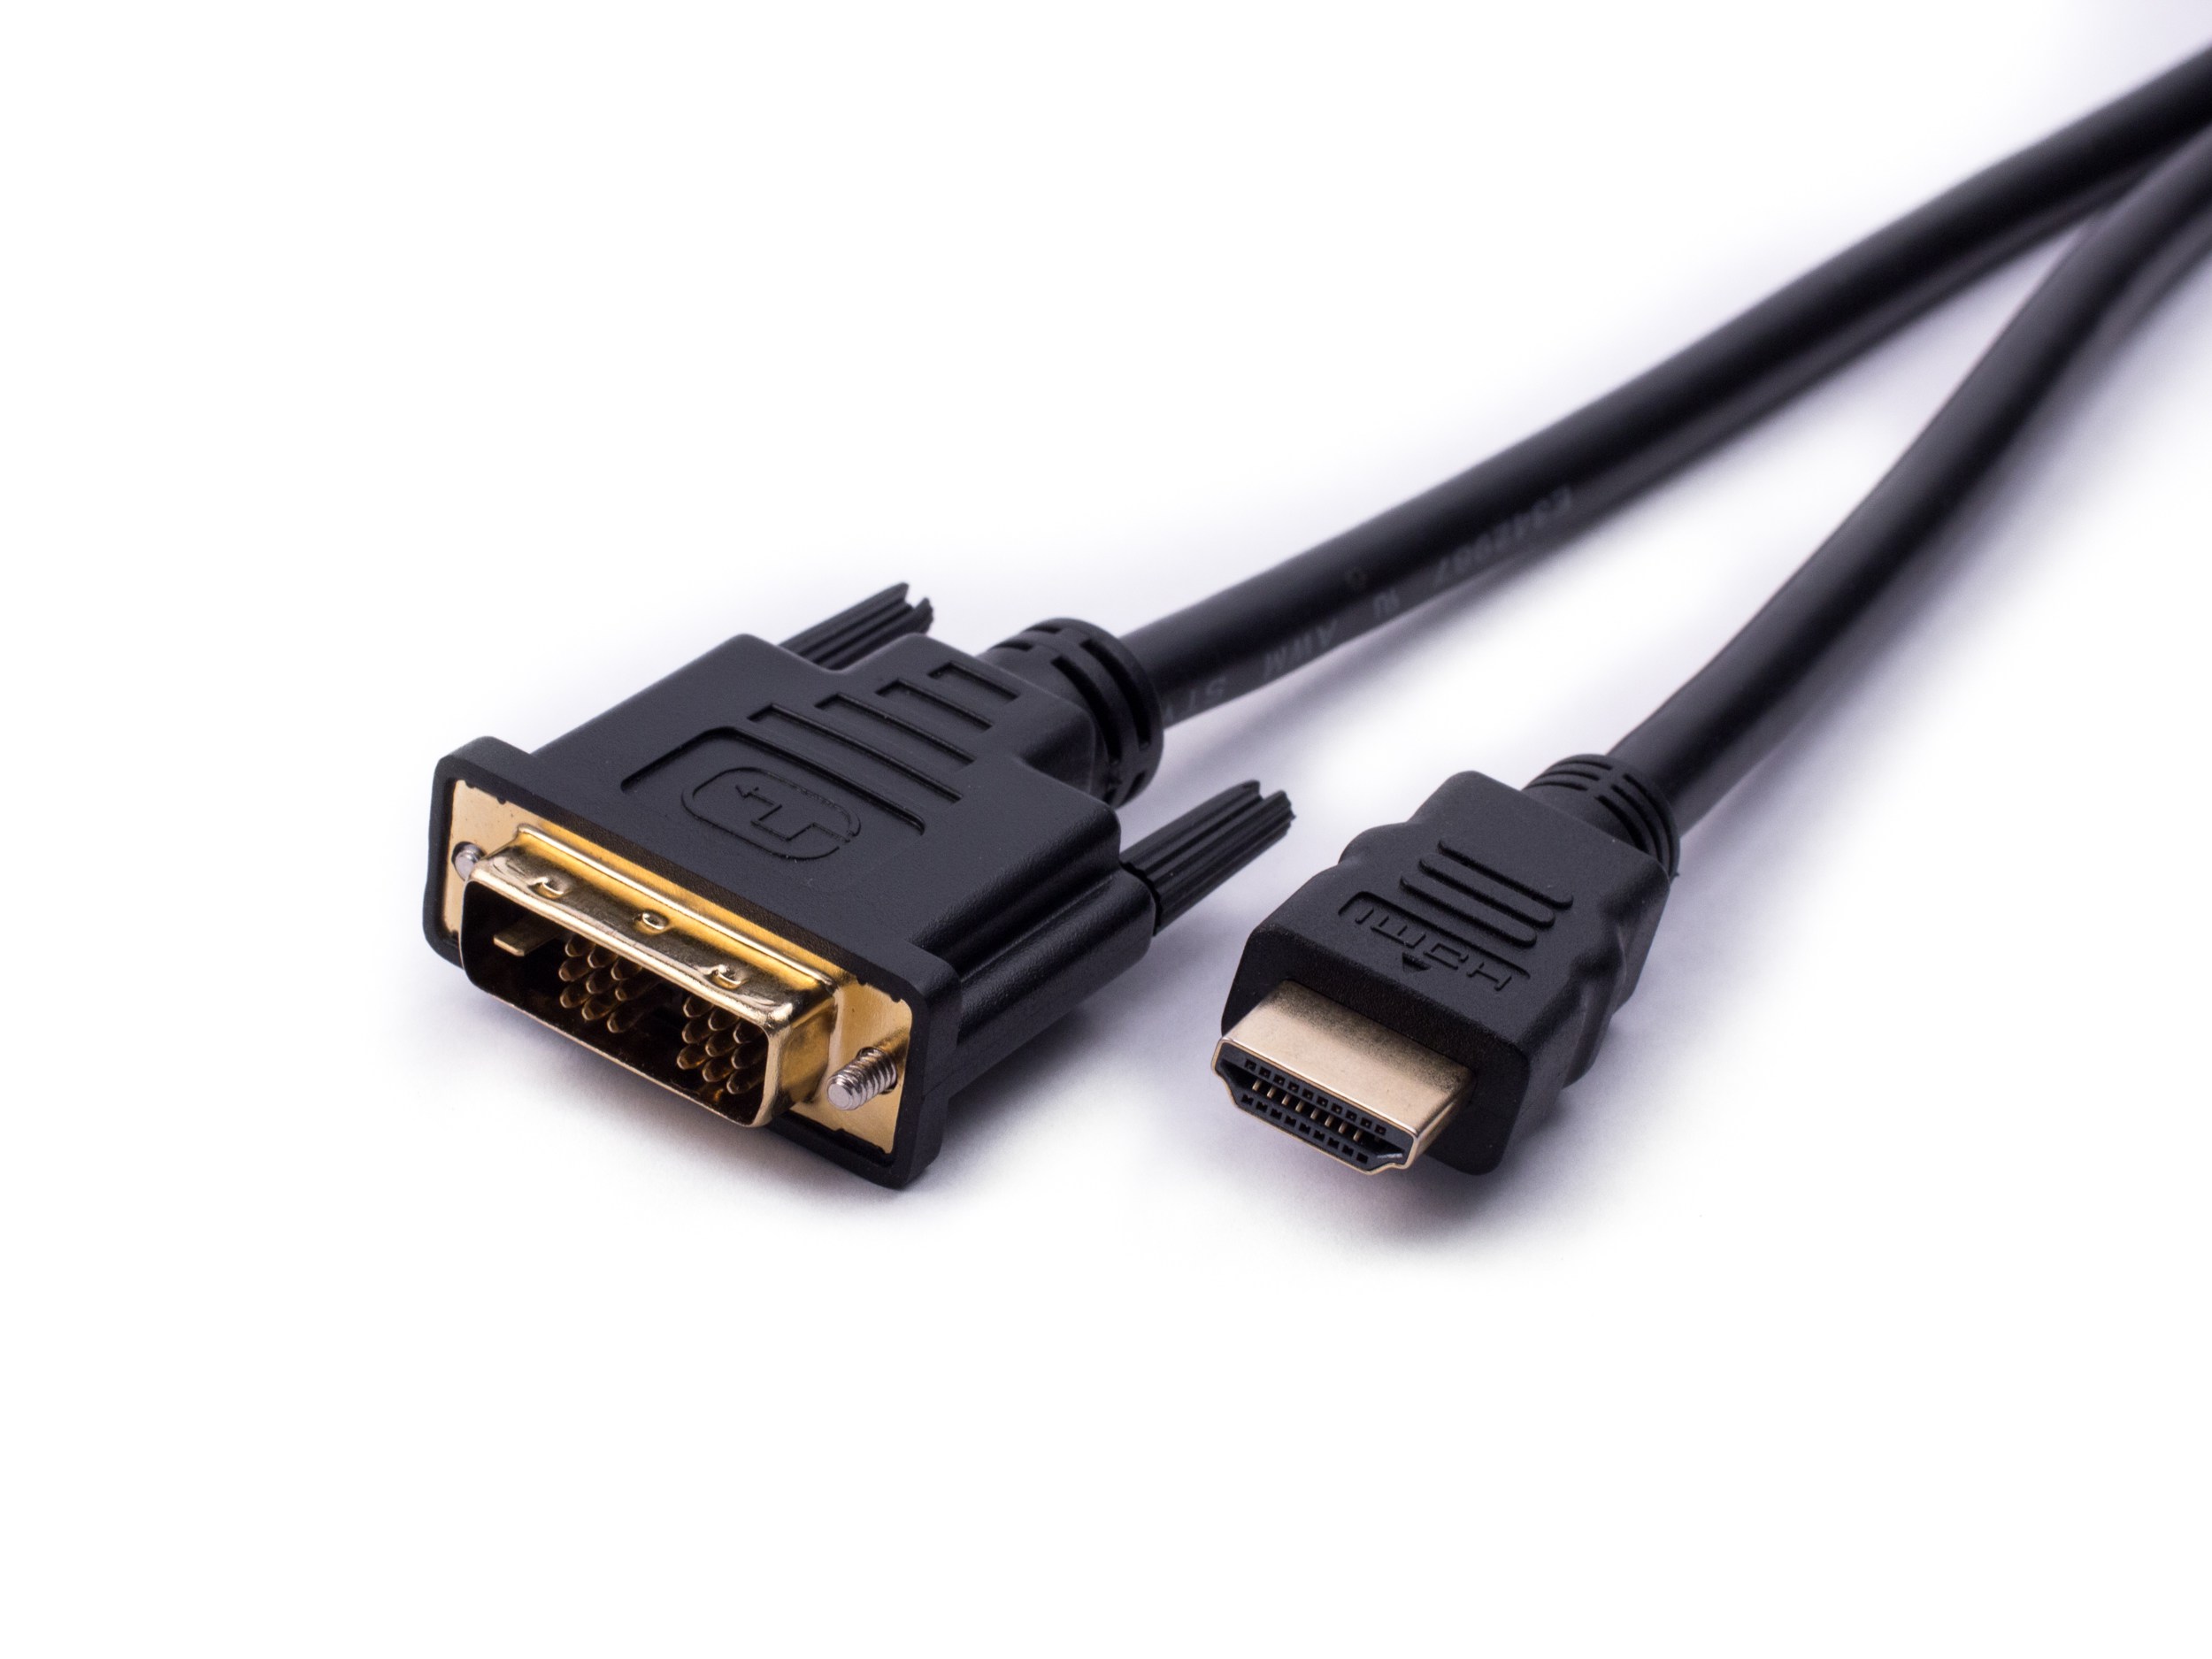 HDMI to DVI Cable - ConnectPRO